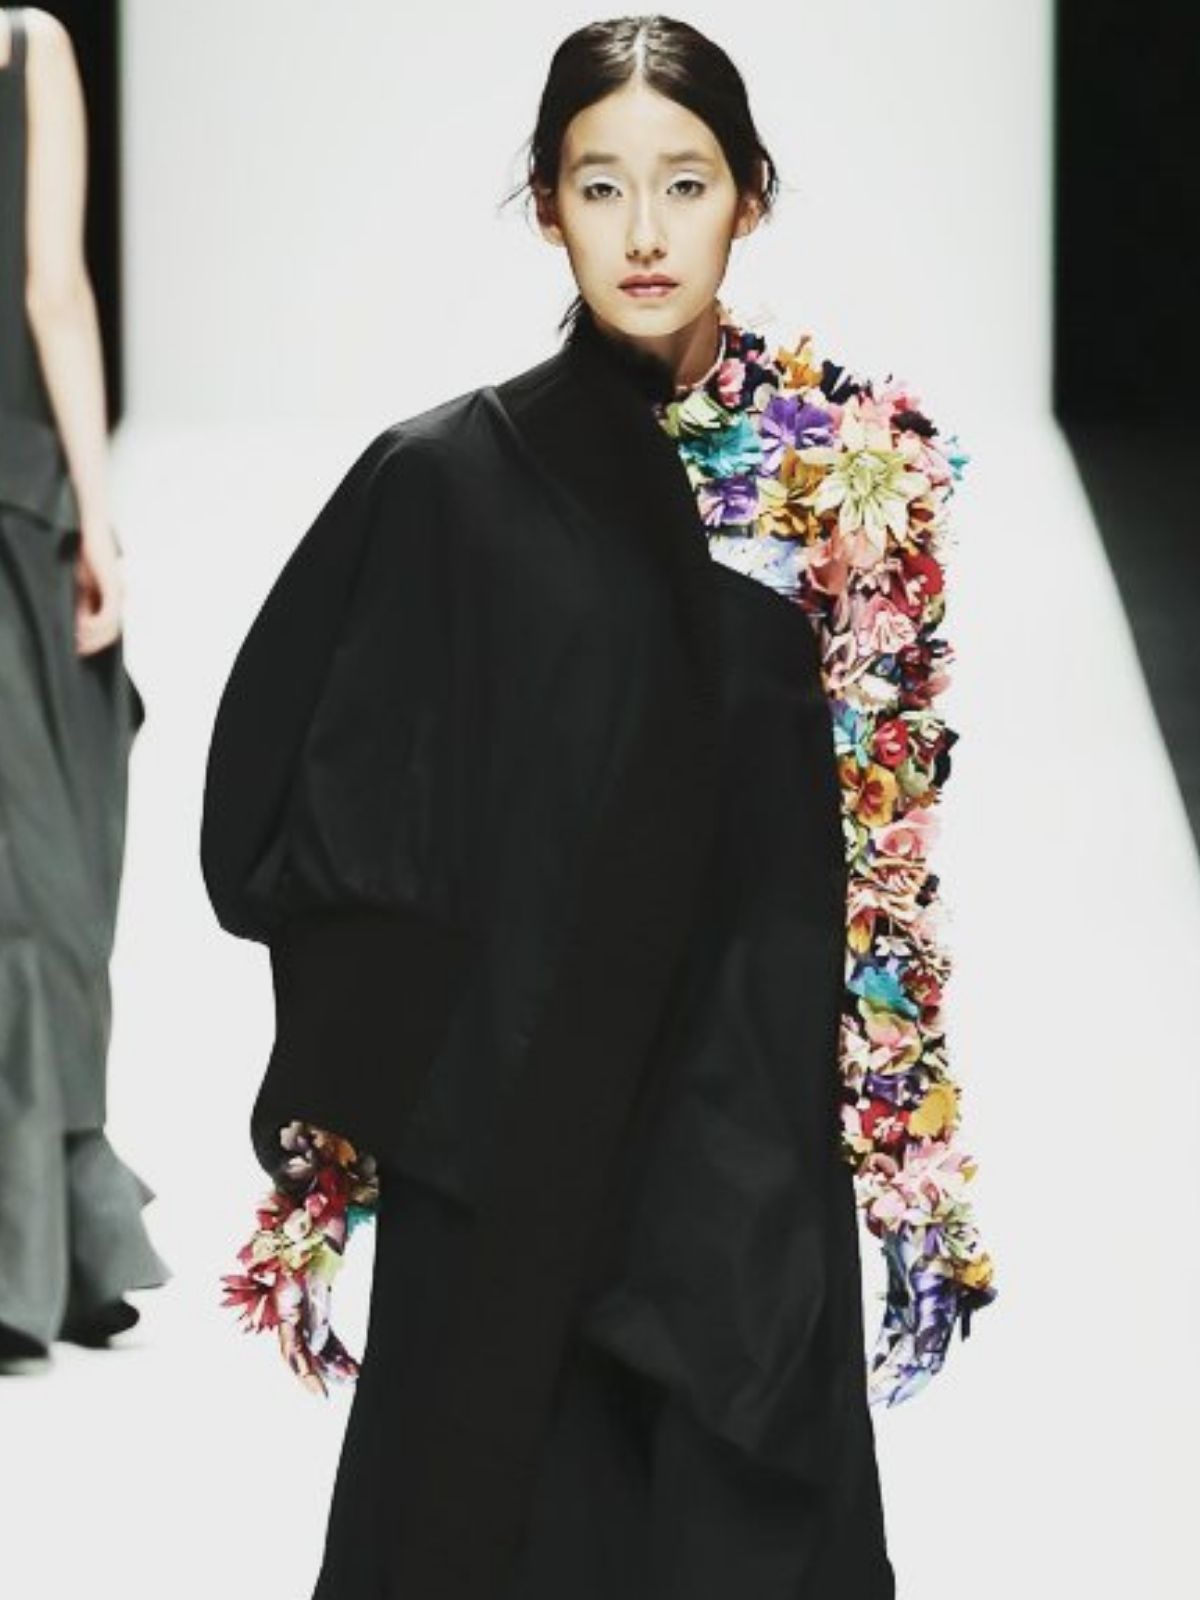 black and flowers dress - floral couture - Nguyen Cong Tri - on thursd